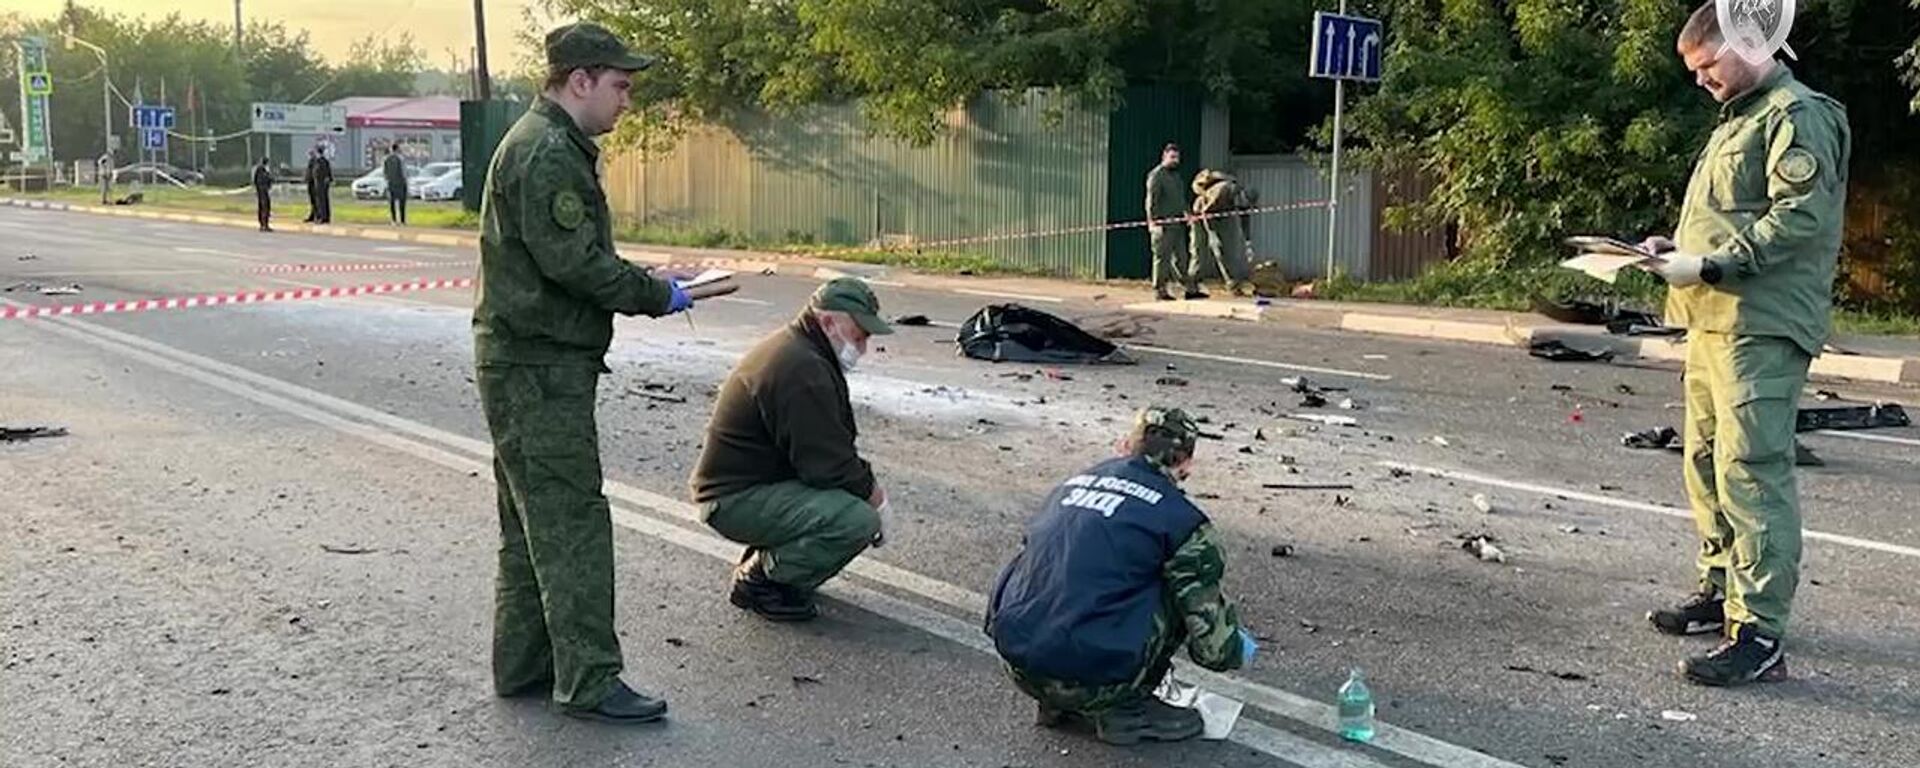 Investigators working on the scene of the car accident that left journo and political analyst Daria Dugina dead. August 21, 2022, Moscow region. - Sputnik International, 1920, 21.08.2022